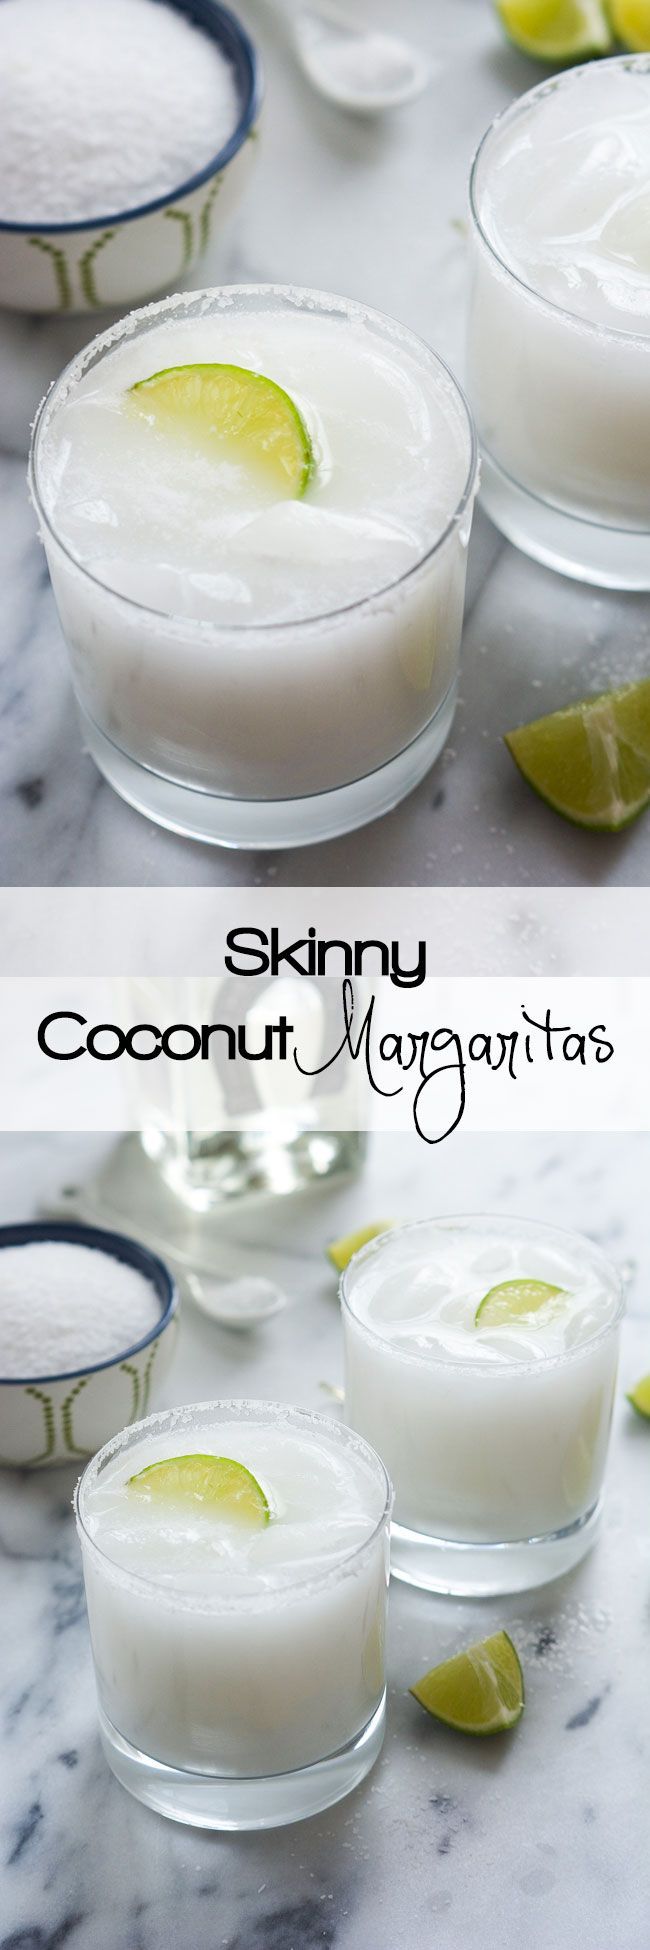 A tropical spin on the classic drink! These Skinny Coconut Margarita are made with lite coconut milk, coconut water, tequila